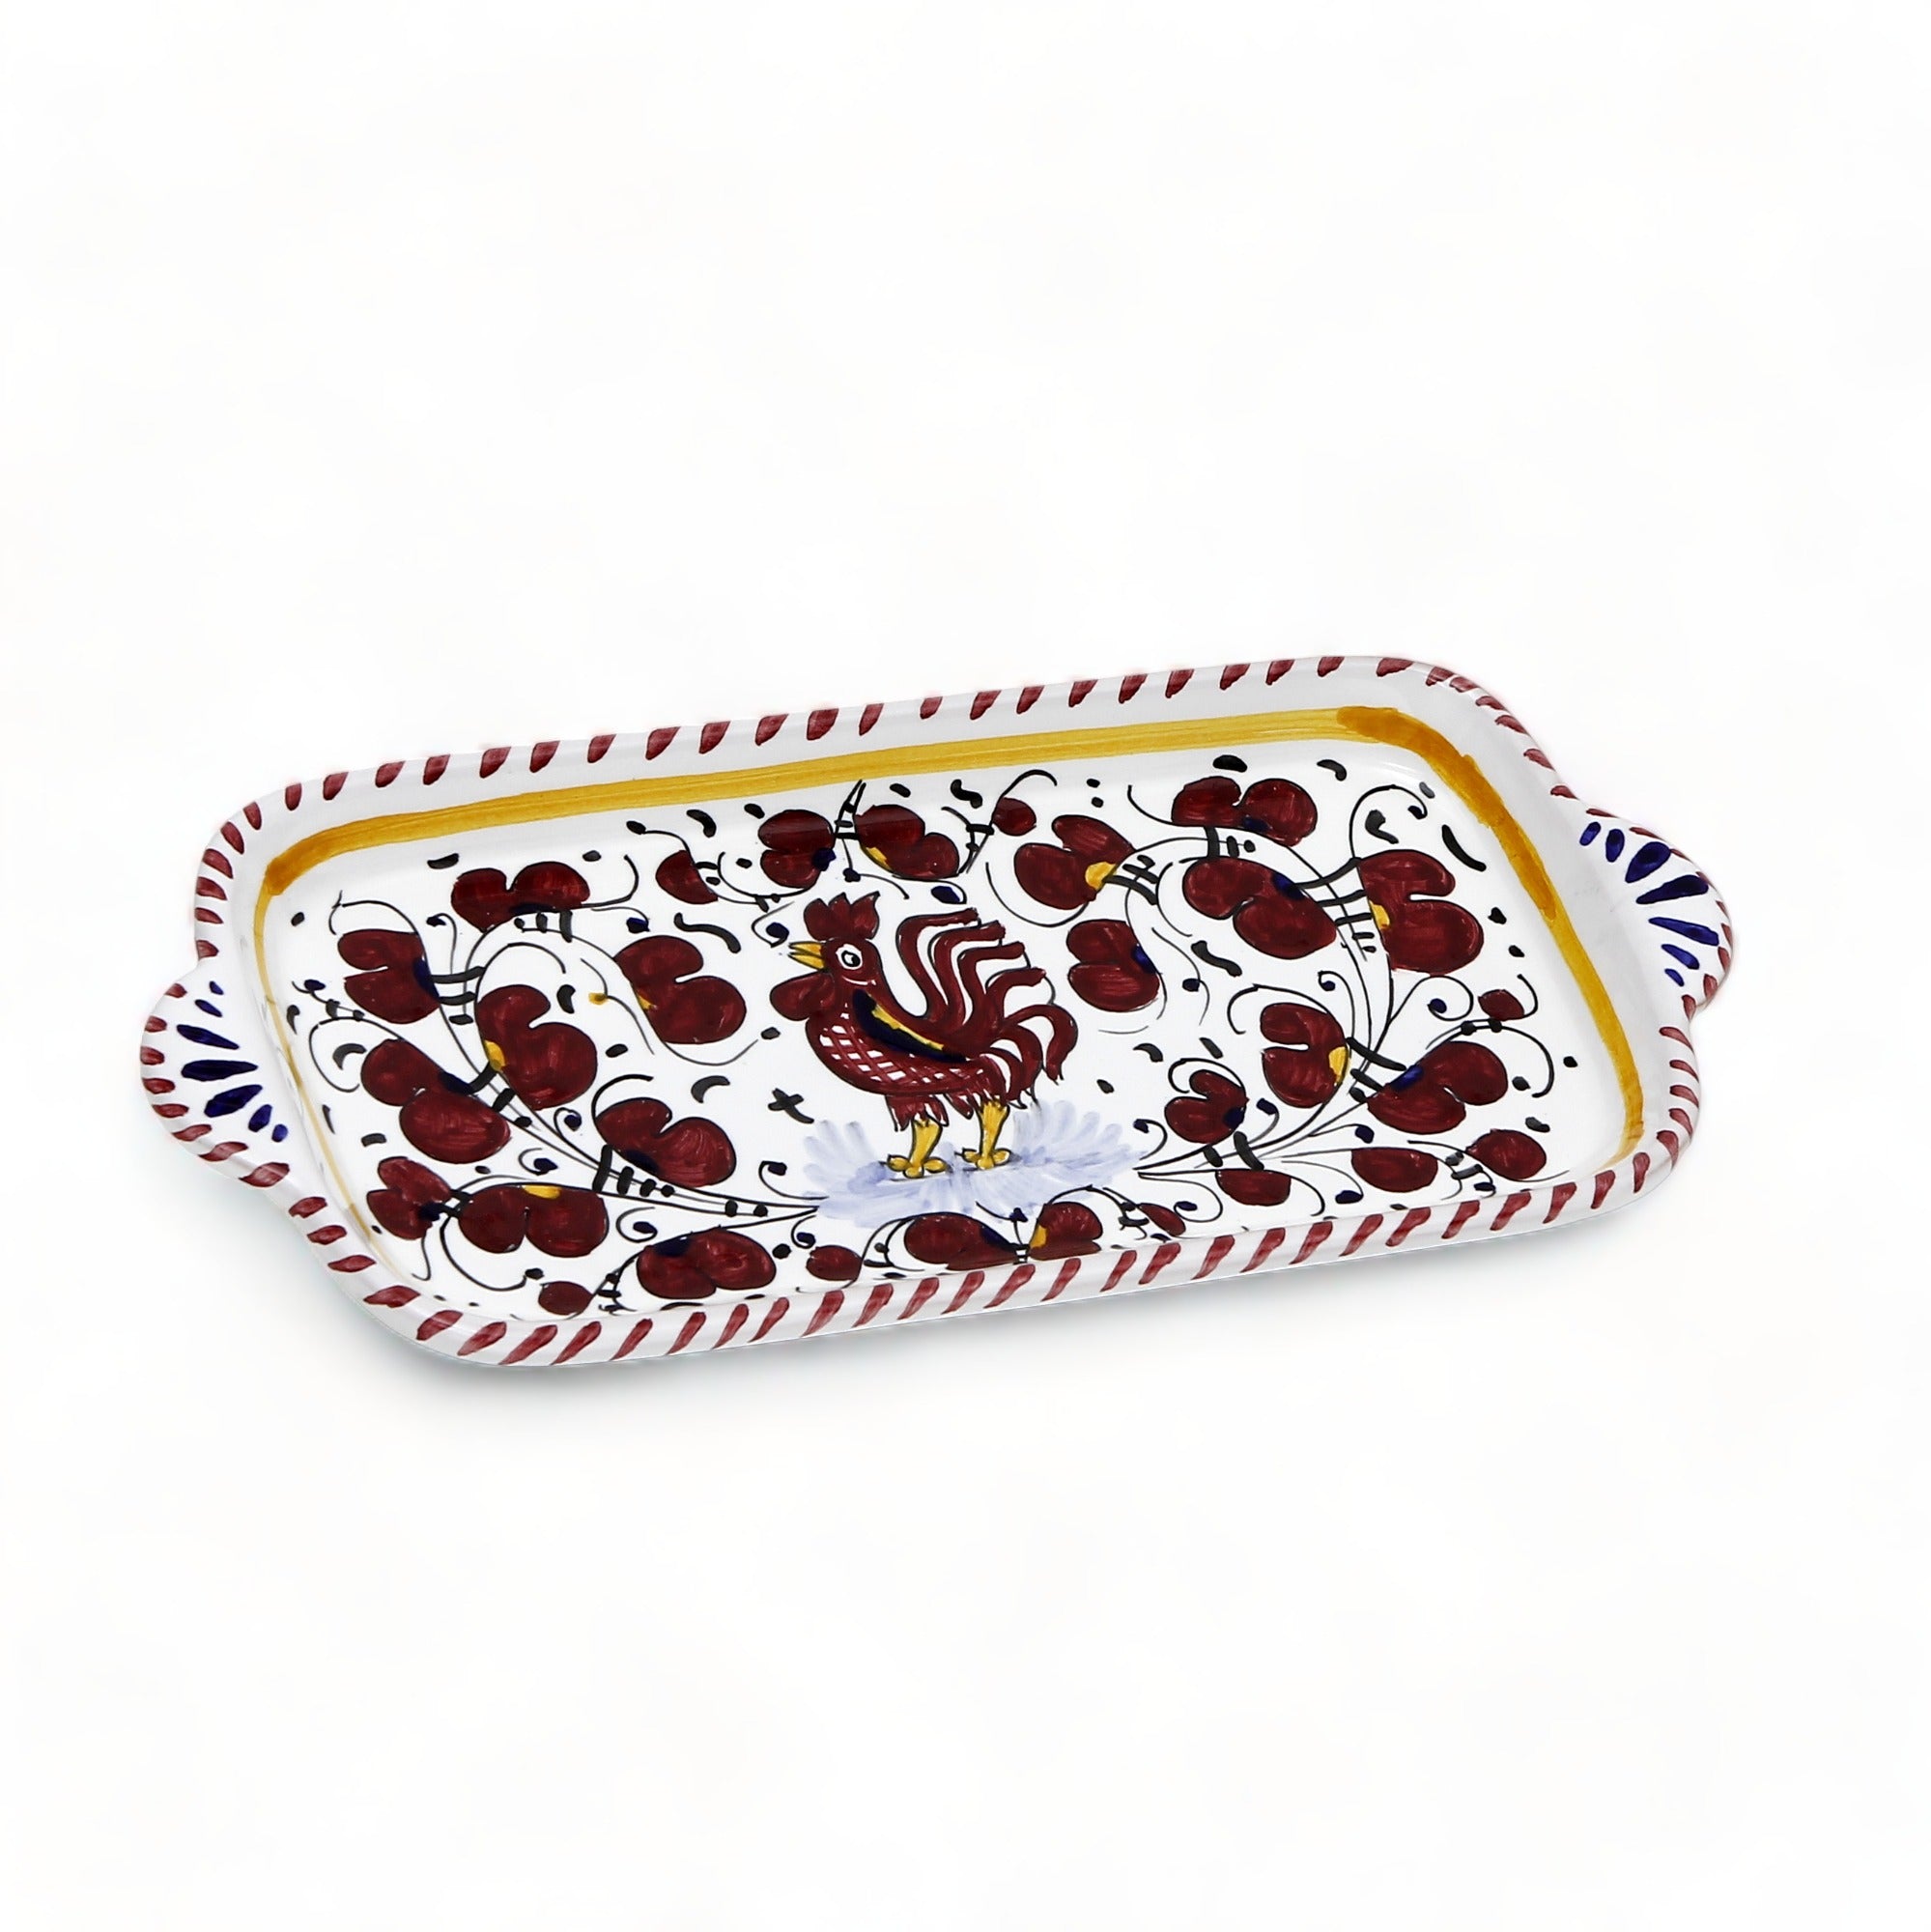 ORVIETO RED ROOSTER: Rectangular Tray SMALL